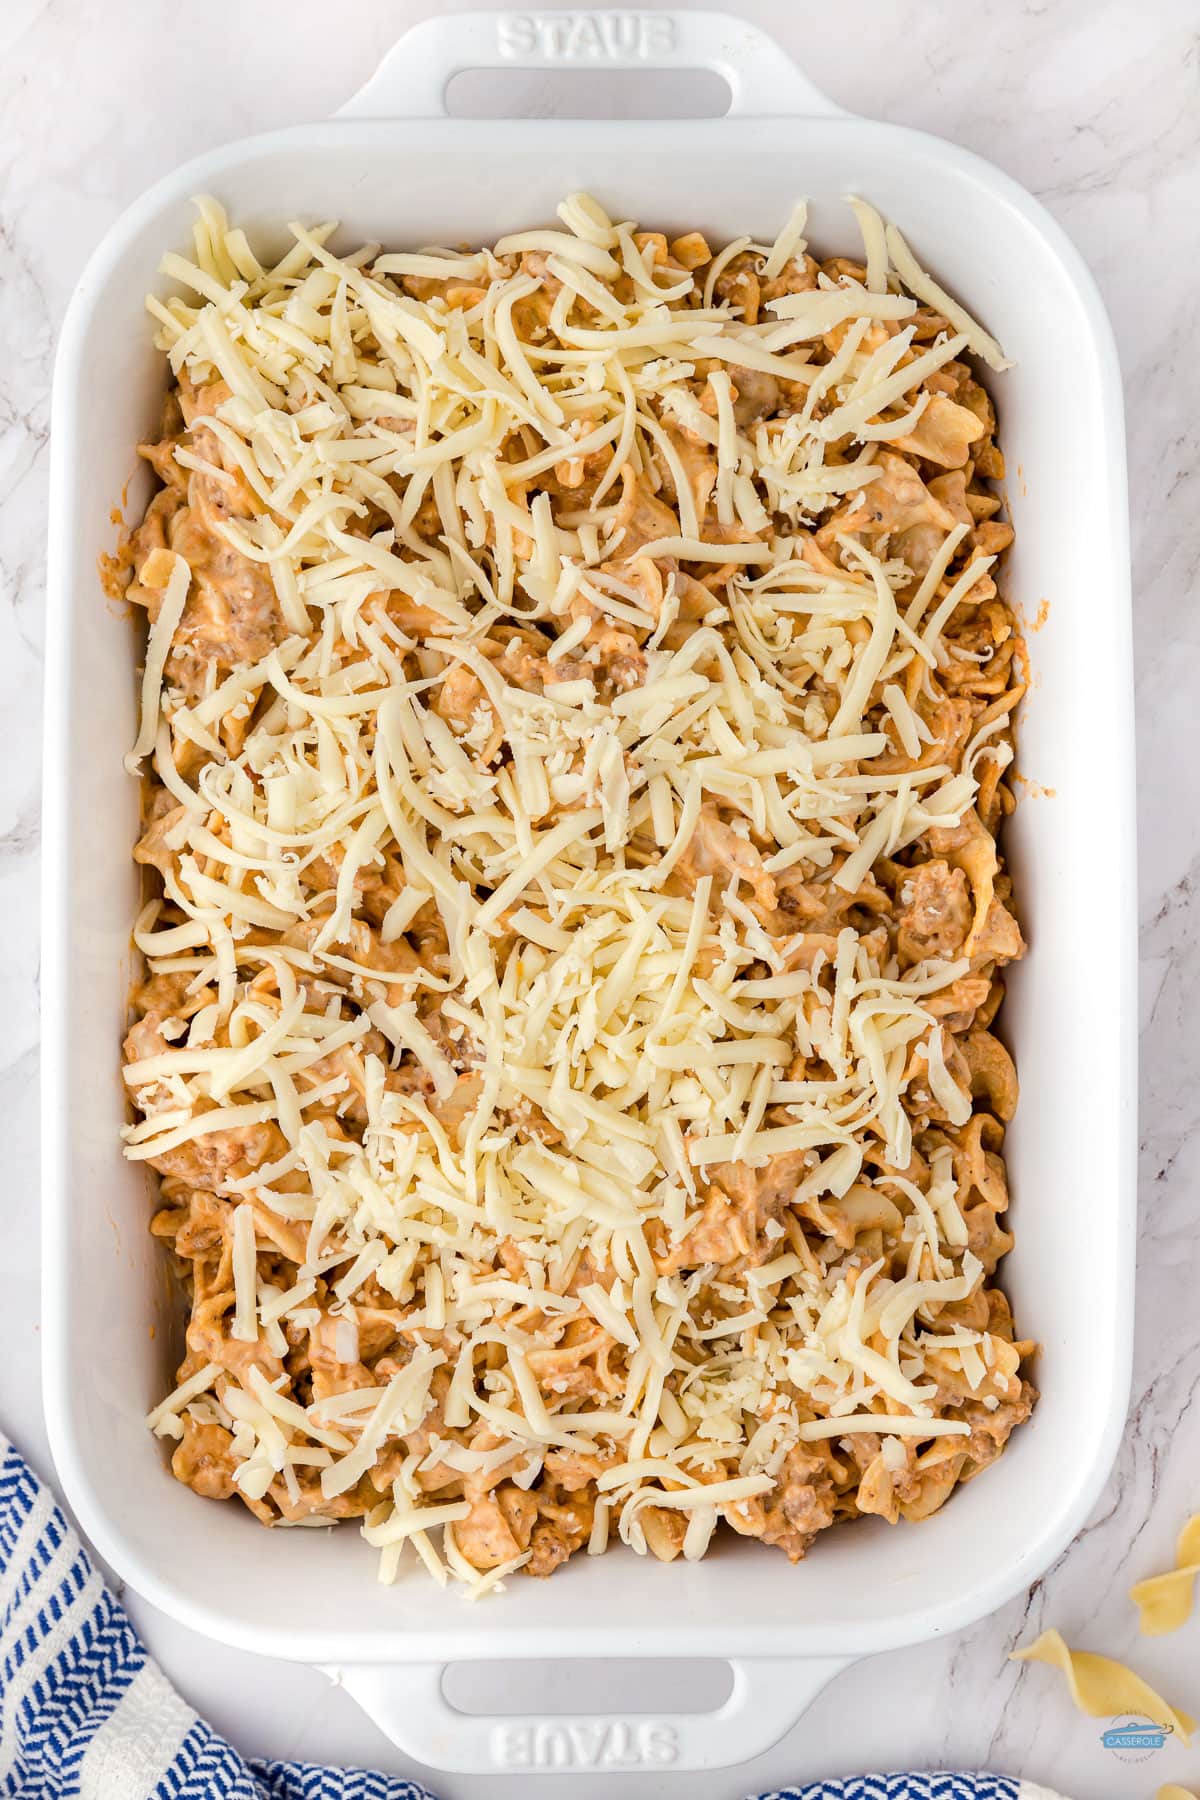 beef noodle casserole with cheese on top and unbaked